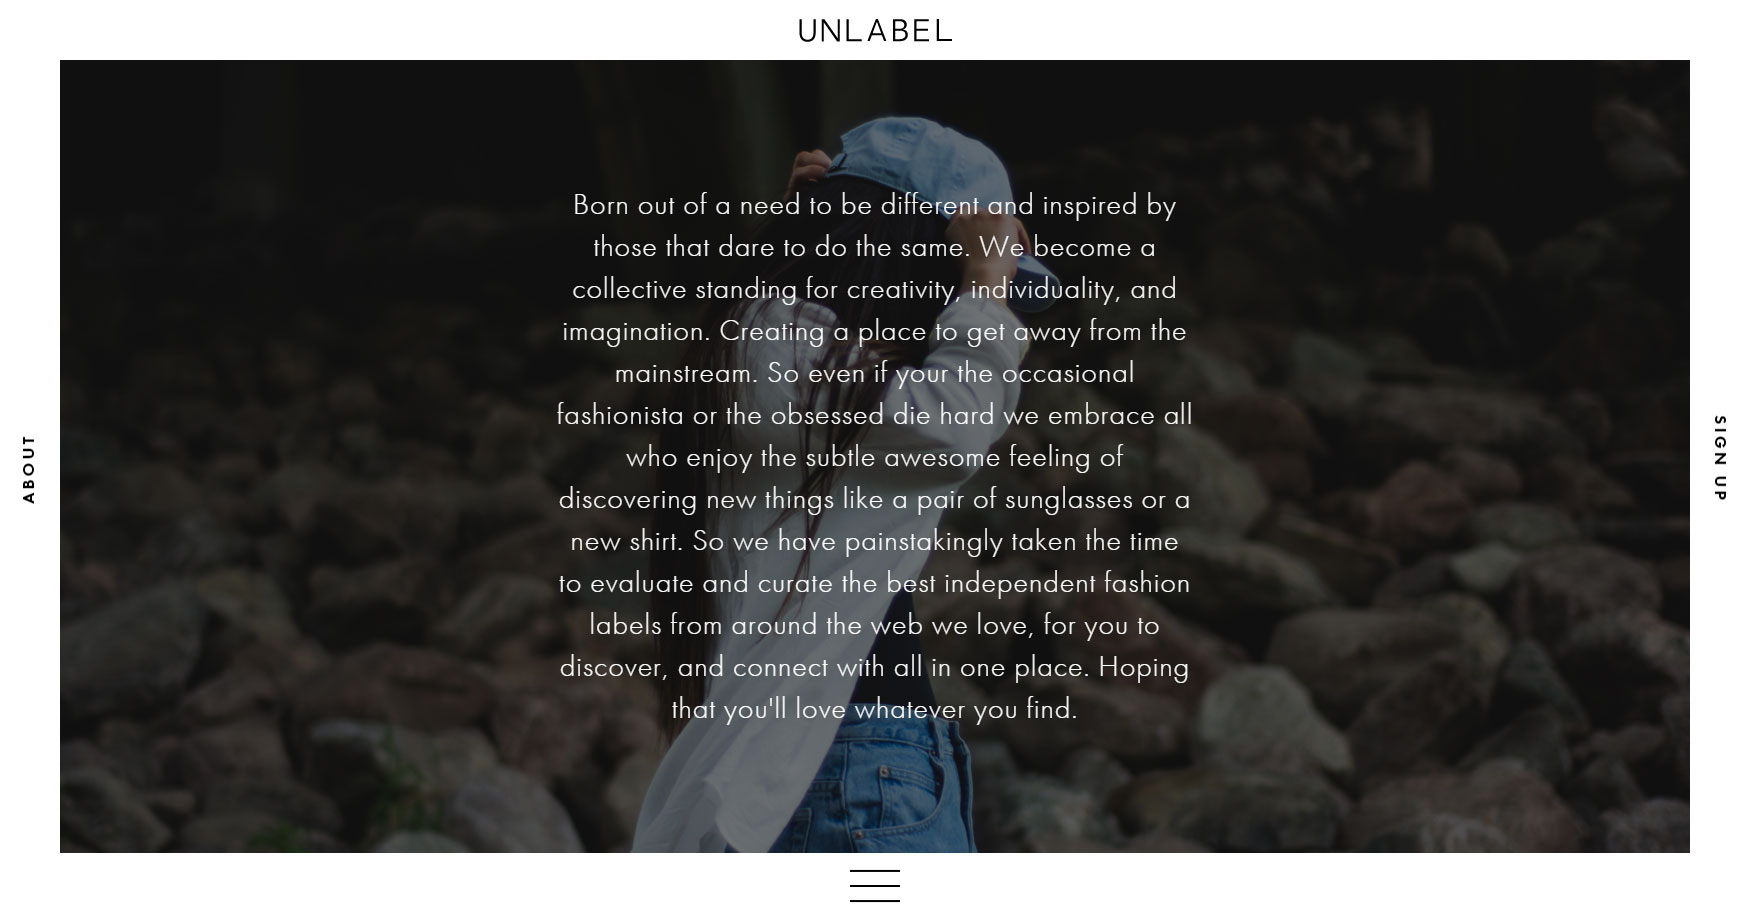 Unlabel - Website of the Day